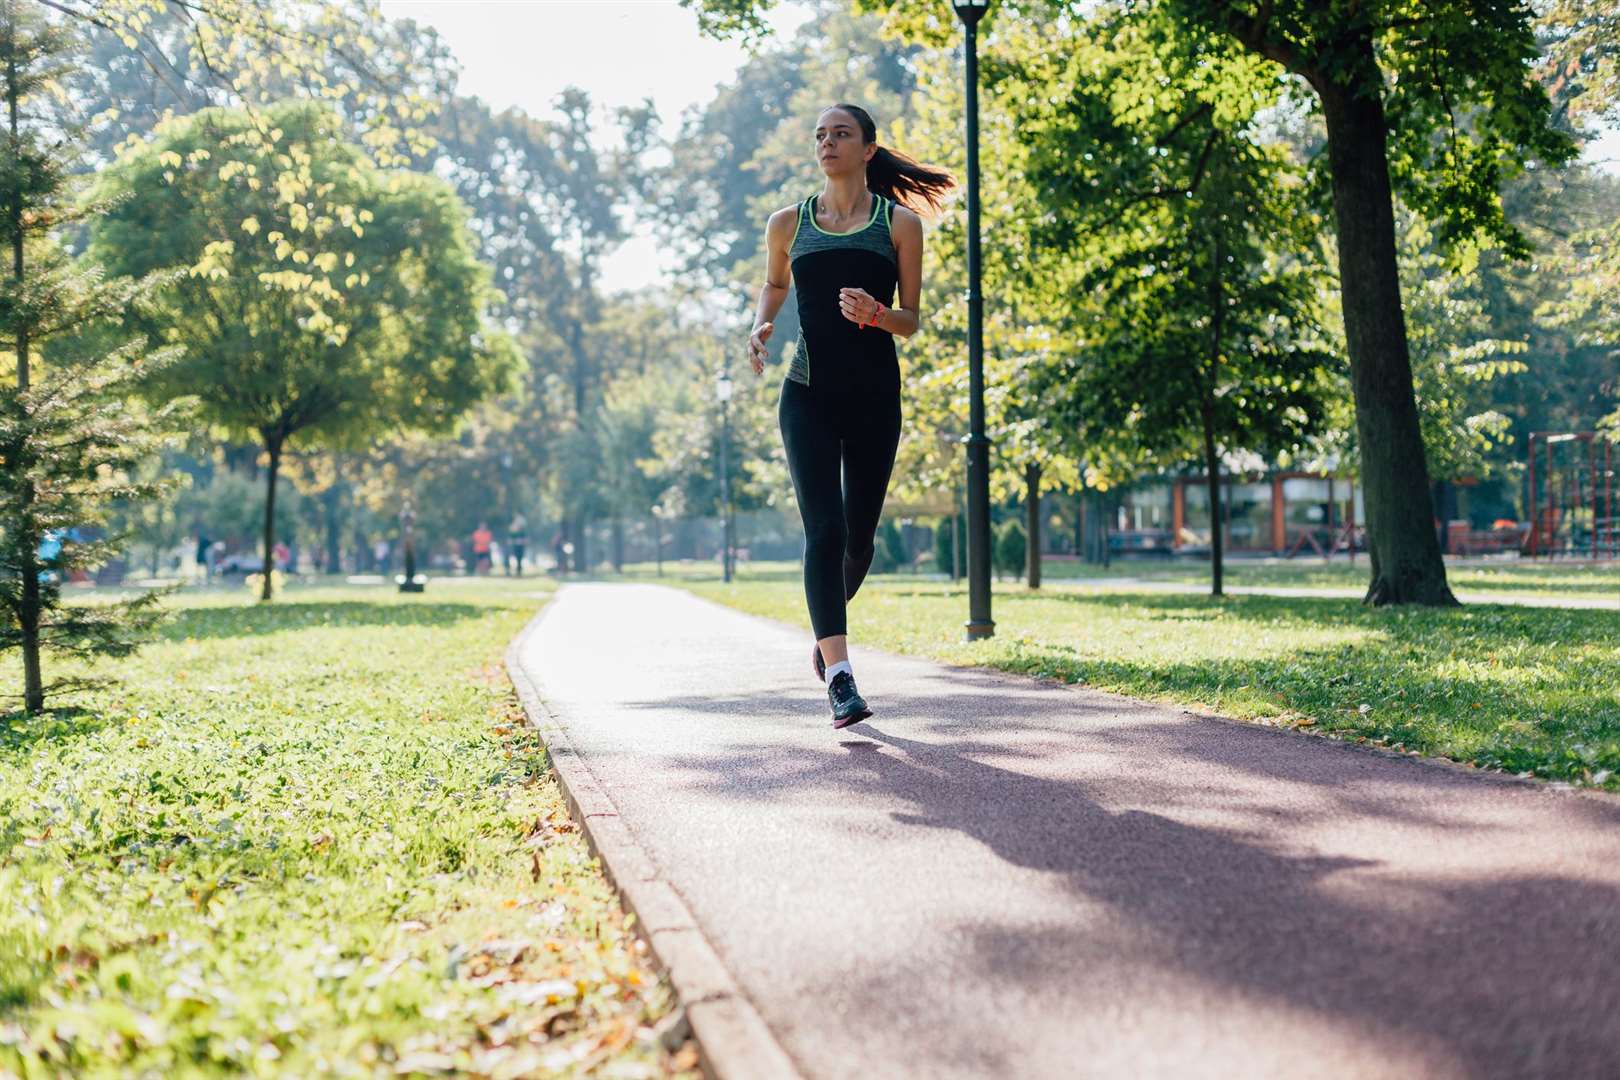 You can now take exercise more than once a day